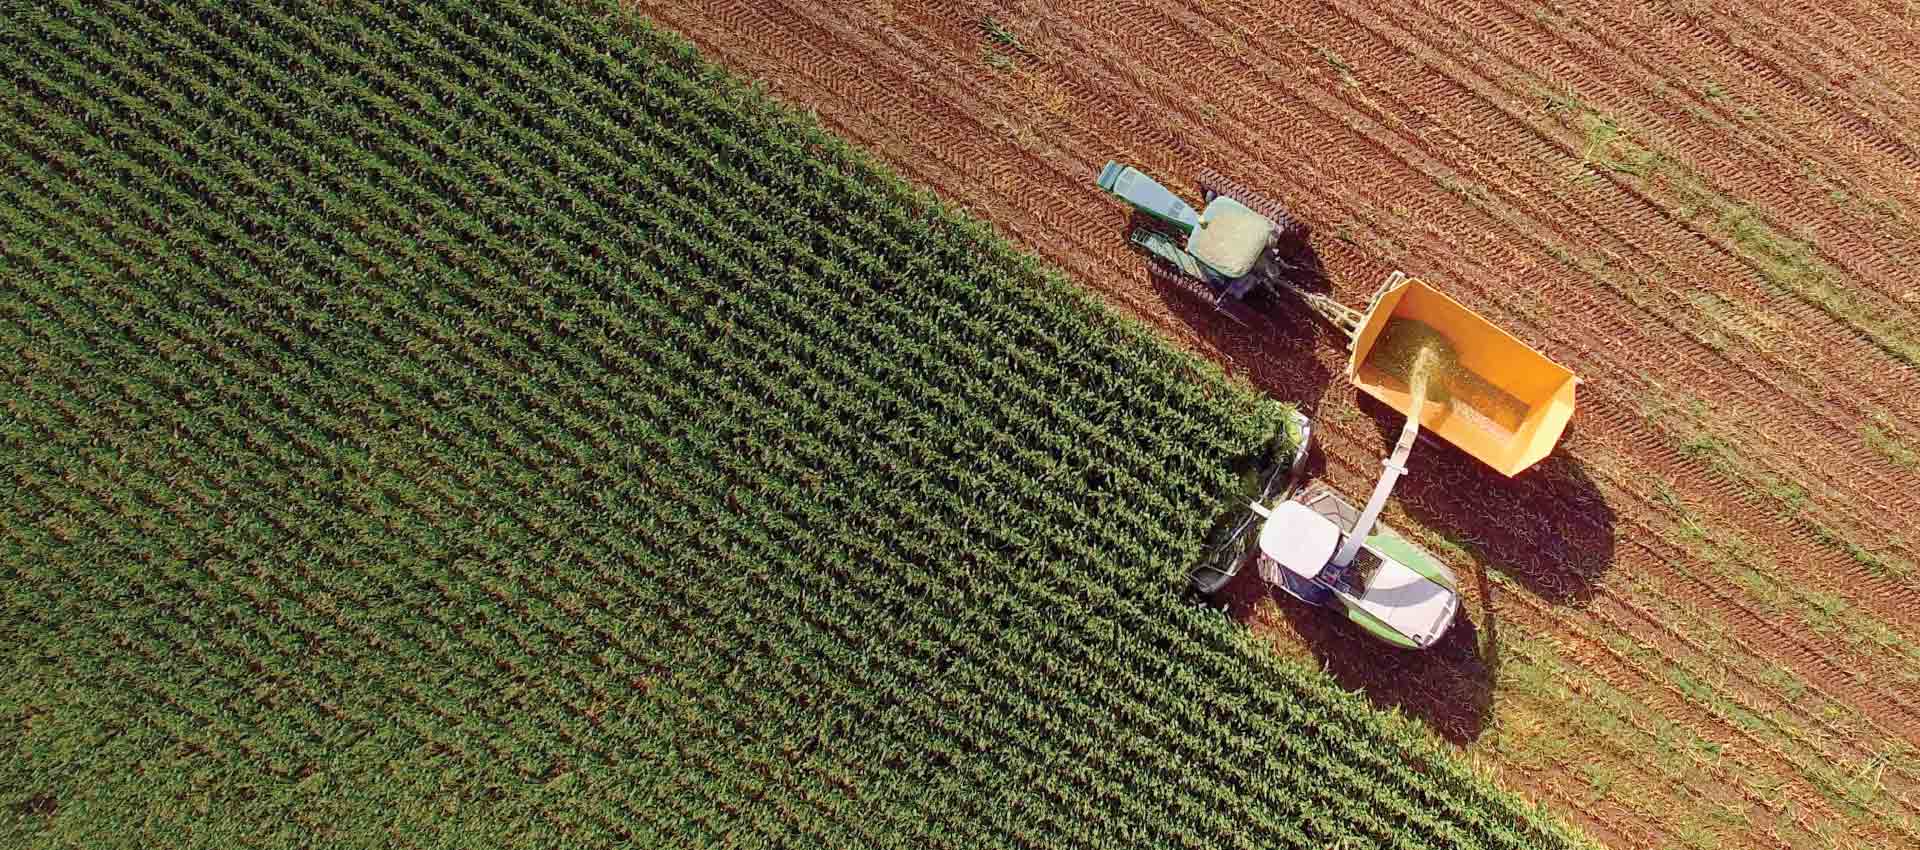  Enterprise AI for Demand Forecasting and Production Scheduling in Global Agribusiness - IoT ONE Case Study